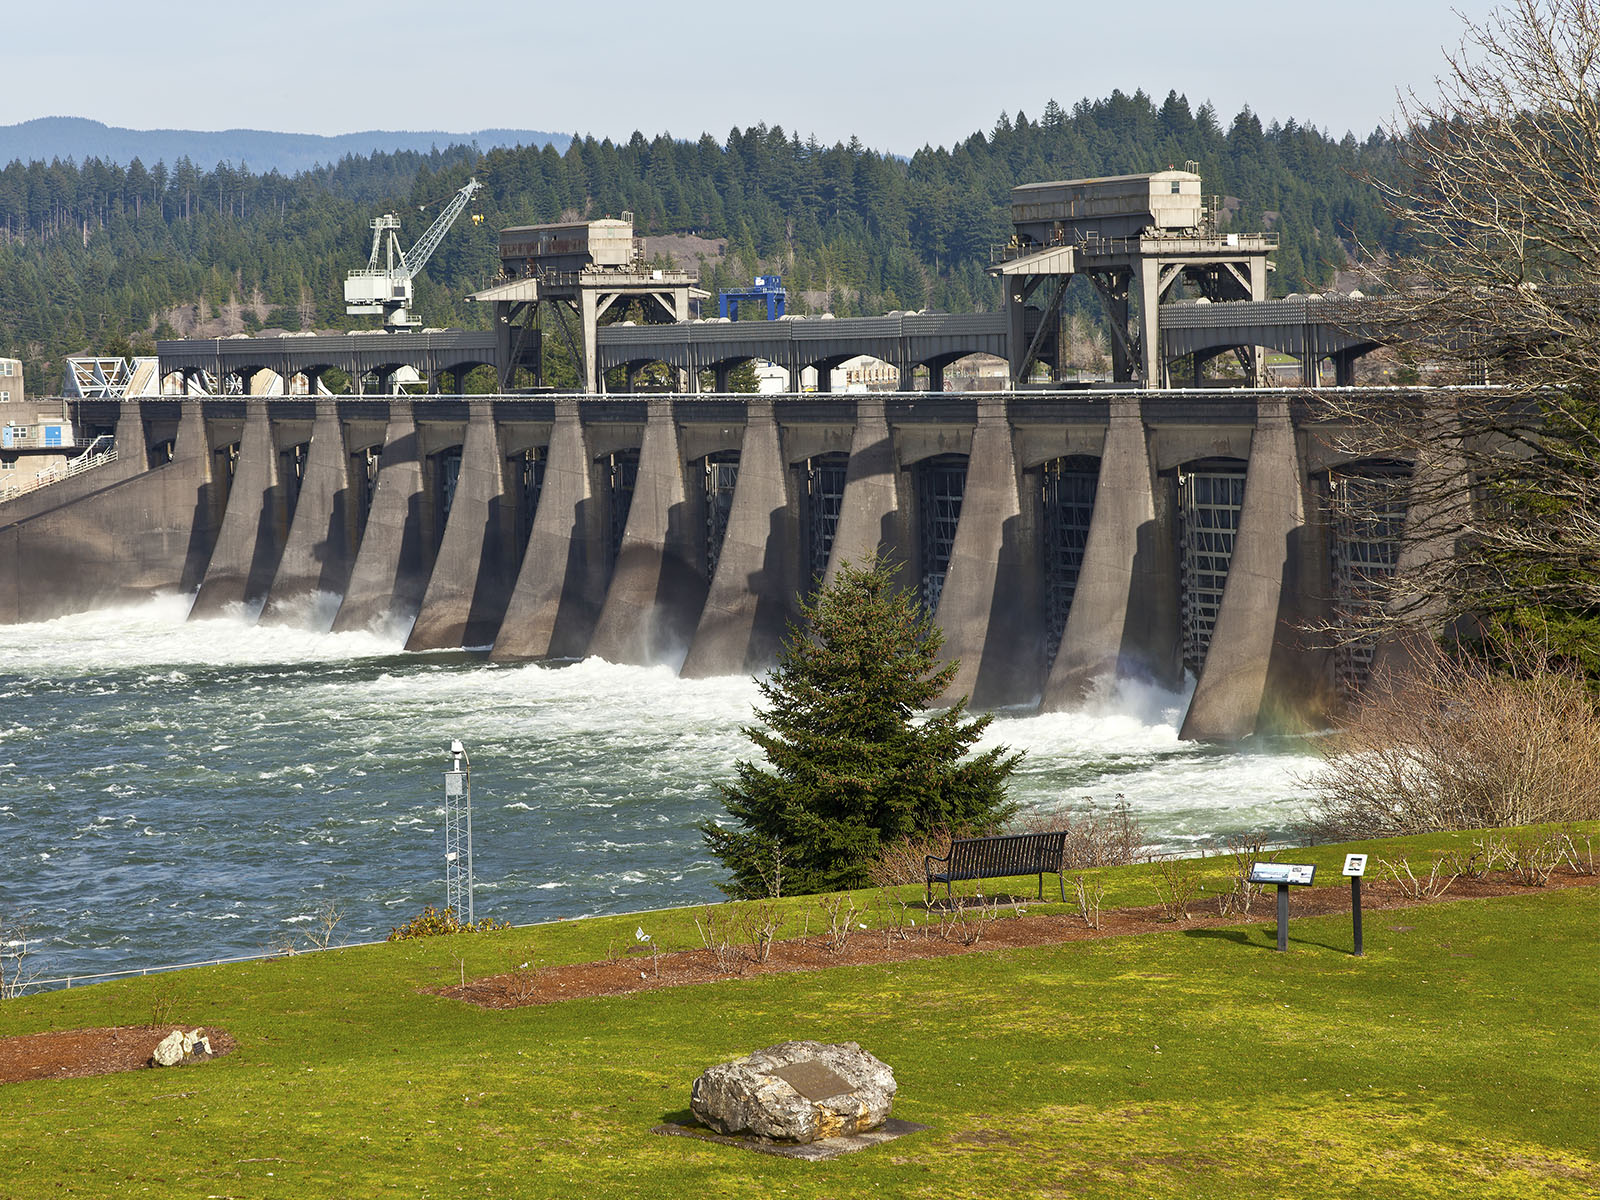 Water is released through the gates of the Bonneville Dam, on the Columbia River near Portland, Ore.